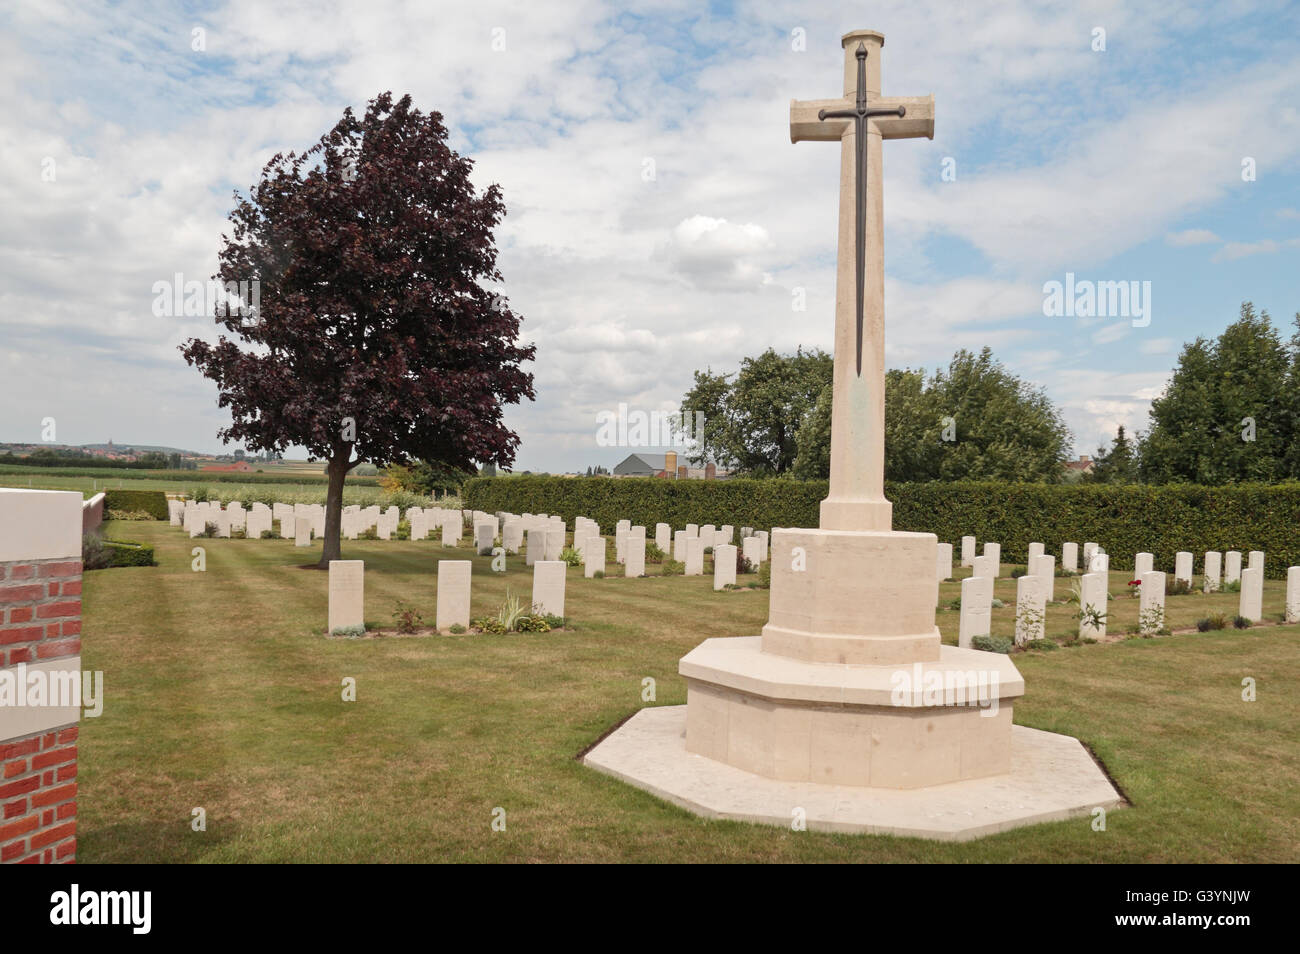 German (front) and Commonwealth (rear) headstones in the CWGC Maple Leaf Cemetery, Hainaut, Belgium. Stock Photo